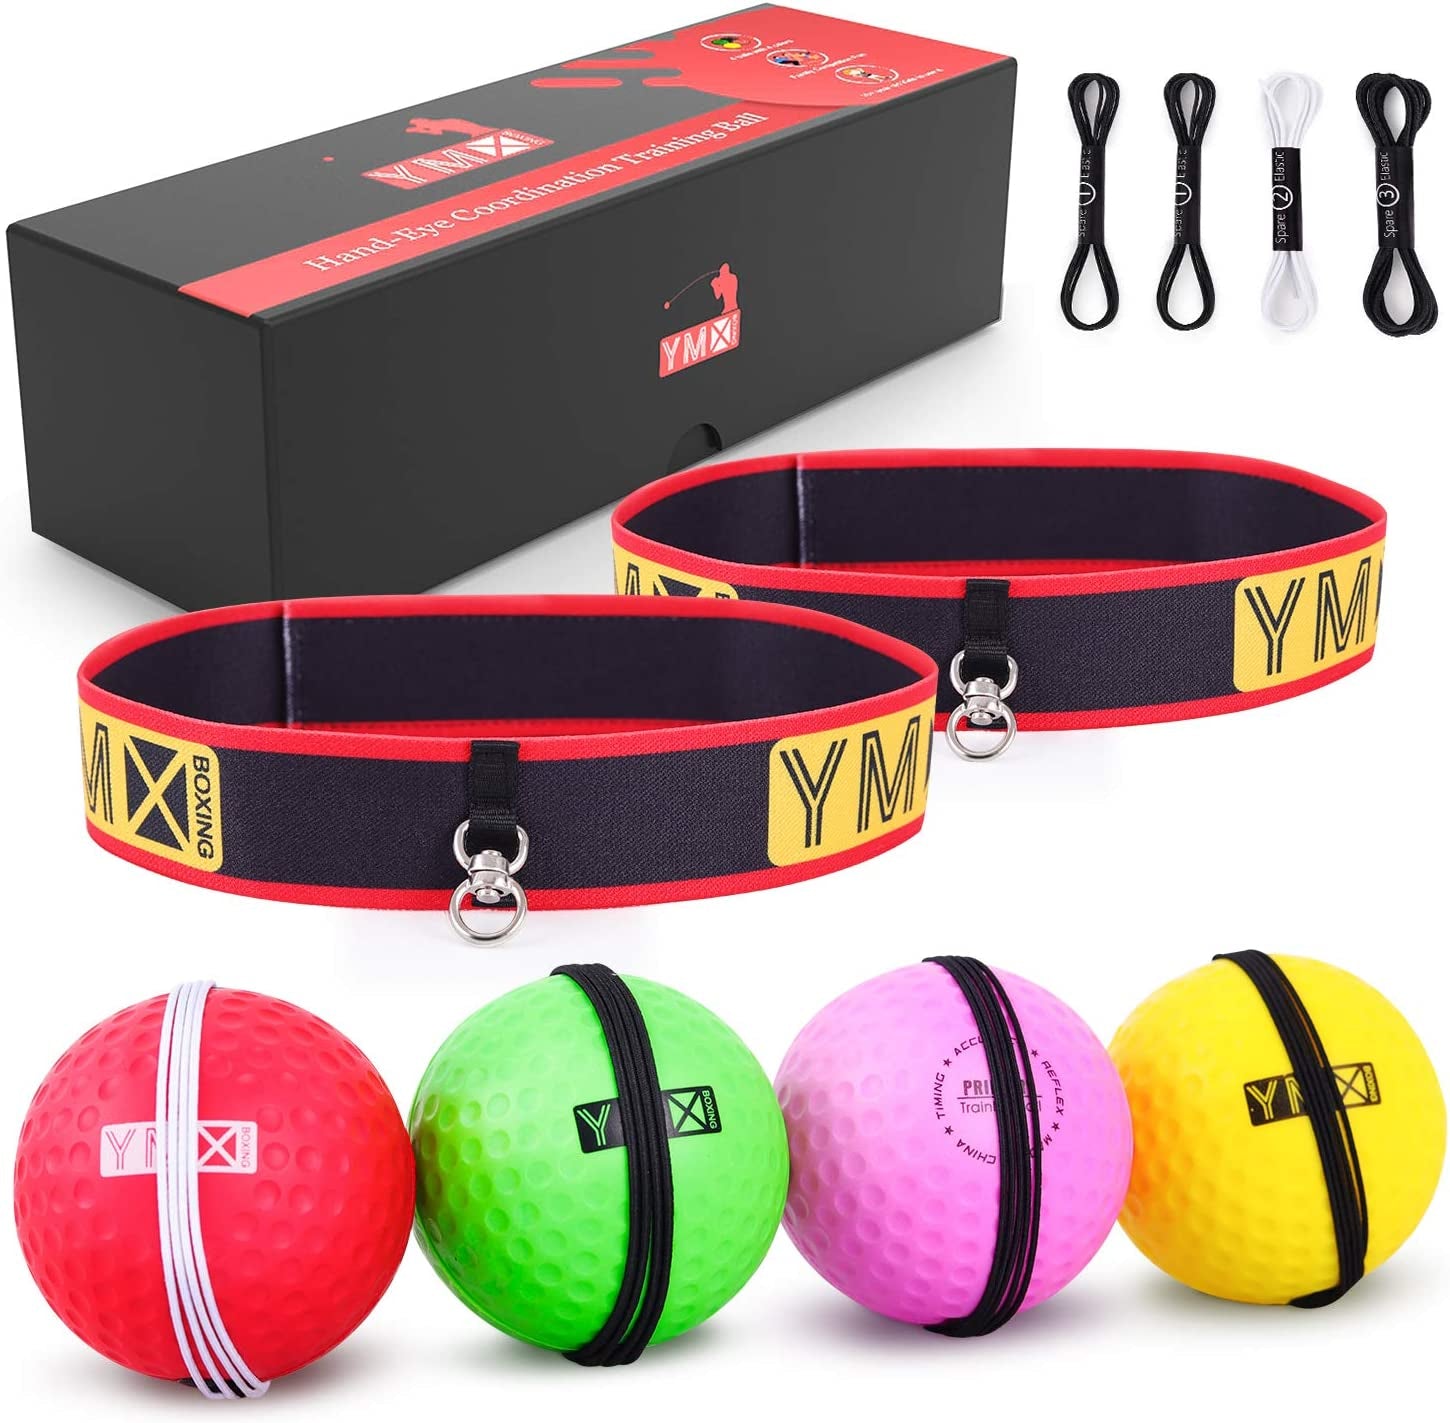 YMX BOXING Ultimate Reflex Ball Set - 4 React Reflex Ball plus 2 Adjustable Headband, Great for Reflex, Timing, Accuracy, Focus and Hand Eye Coordination Training for Boxing, MMA and Krav Mega